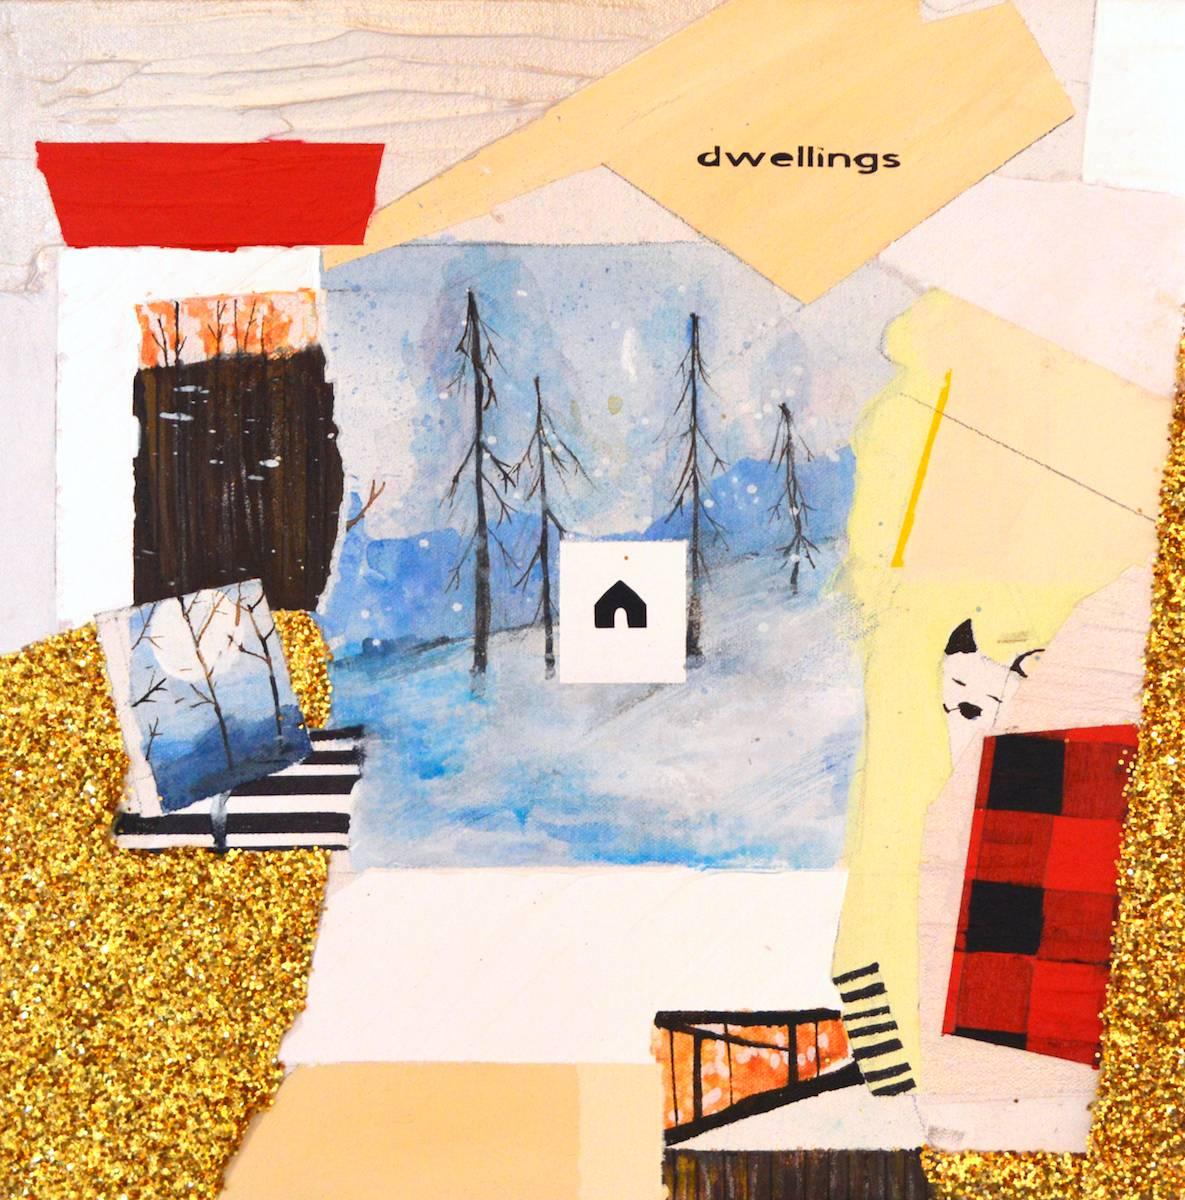 Jenny Day Abstract Painting - Dwellings